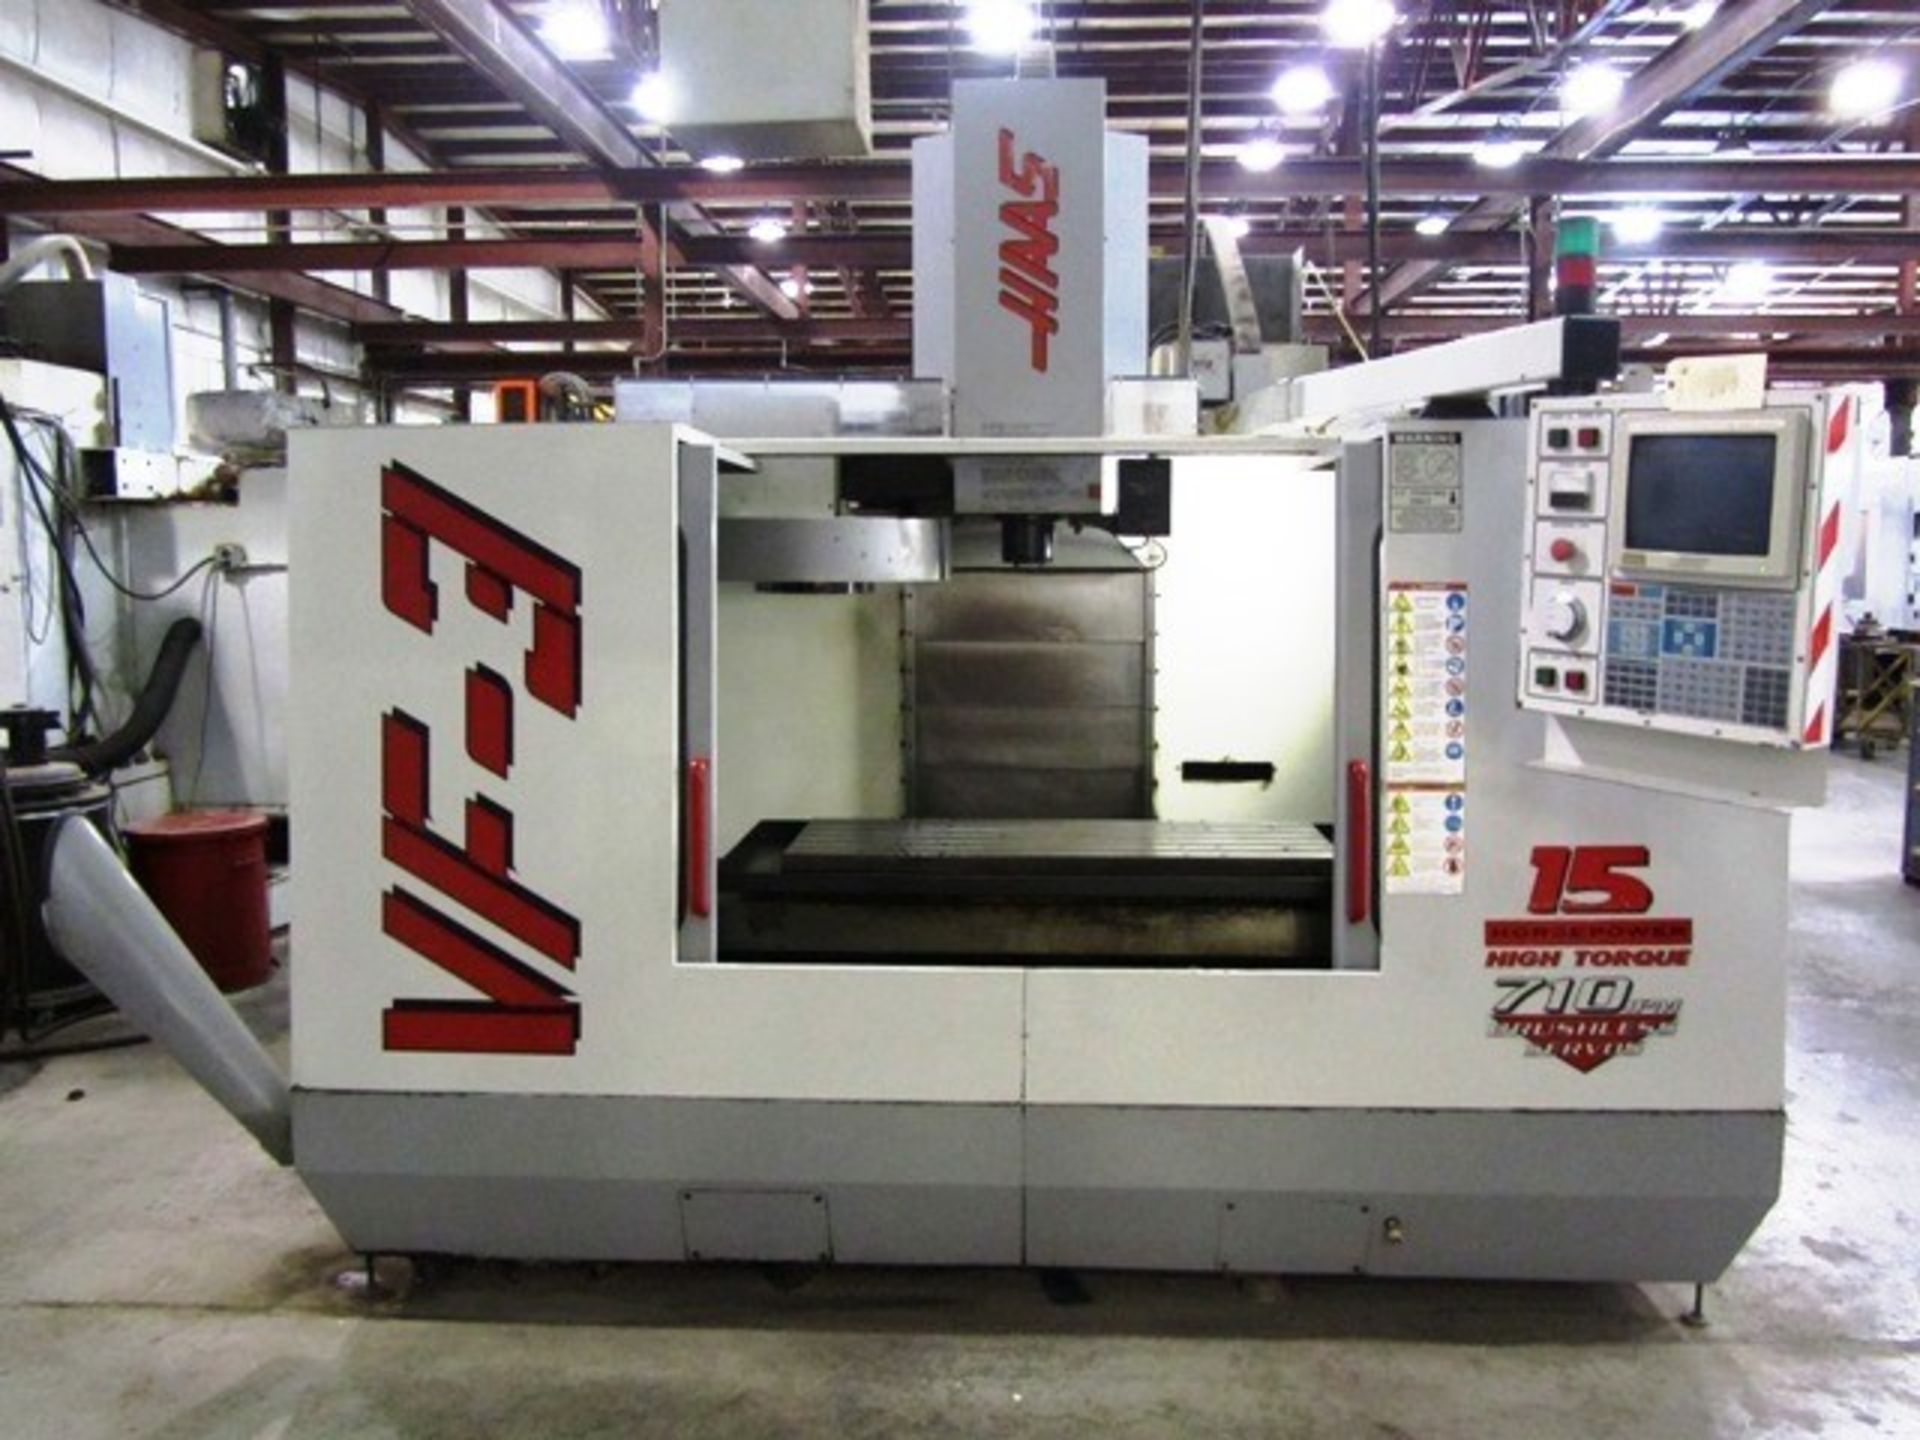 Haas VF3 CNC 4-Axis Vertical Machining Center with 48" x 18" Table, 40"-X, 20"-Y, 25"-Z-Axis